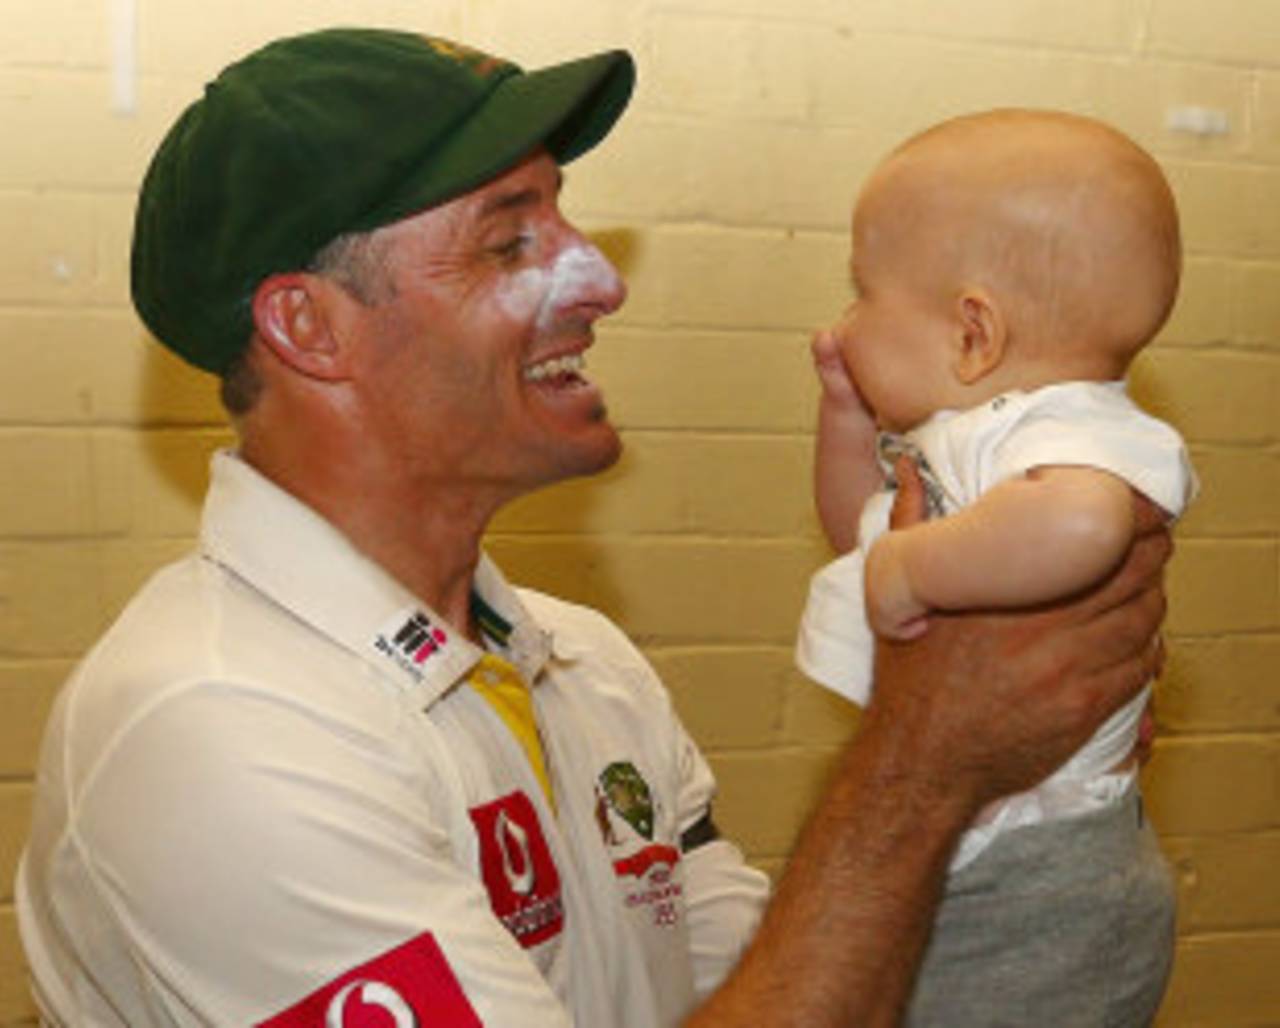 Michael Hussey's life after international cricket is set to include commentary as well as family&nbsp;&nbsp;&bull;&nbsp;&nbsp;Getty Images